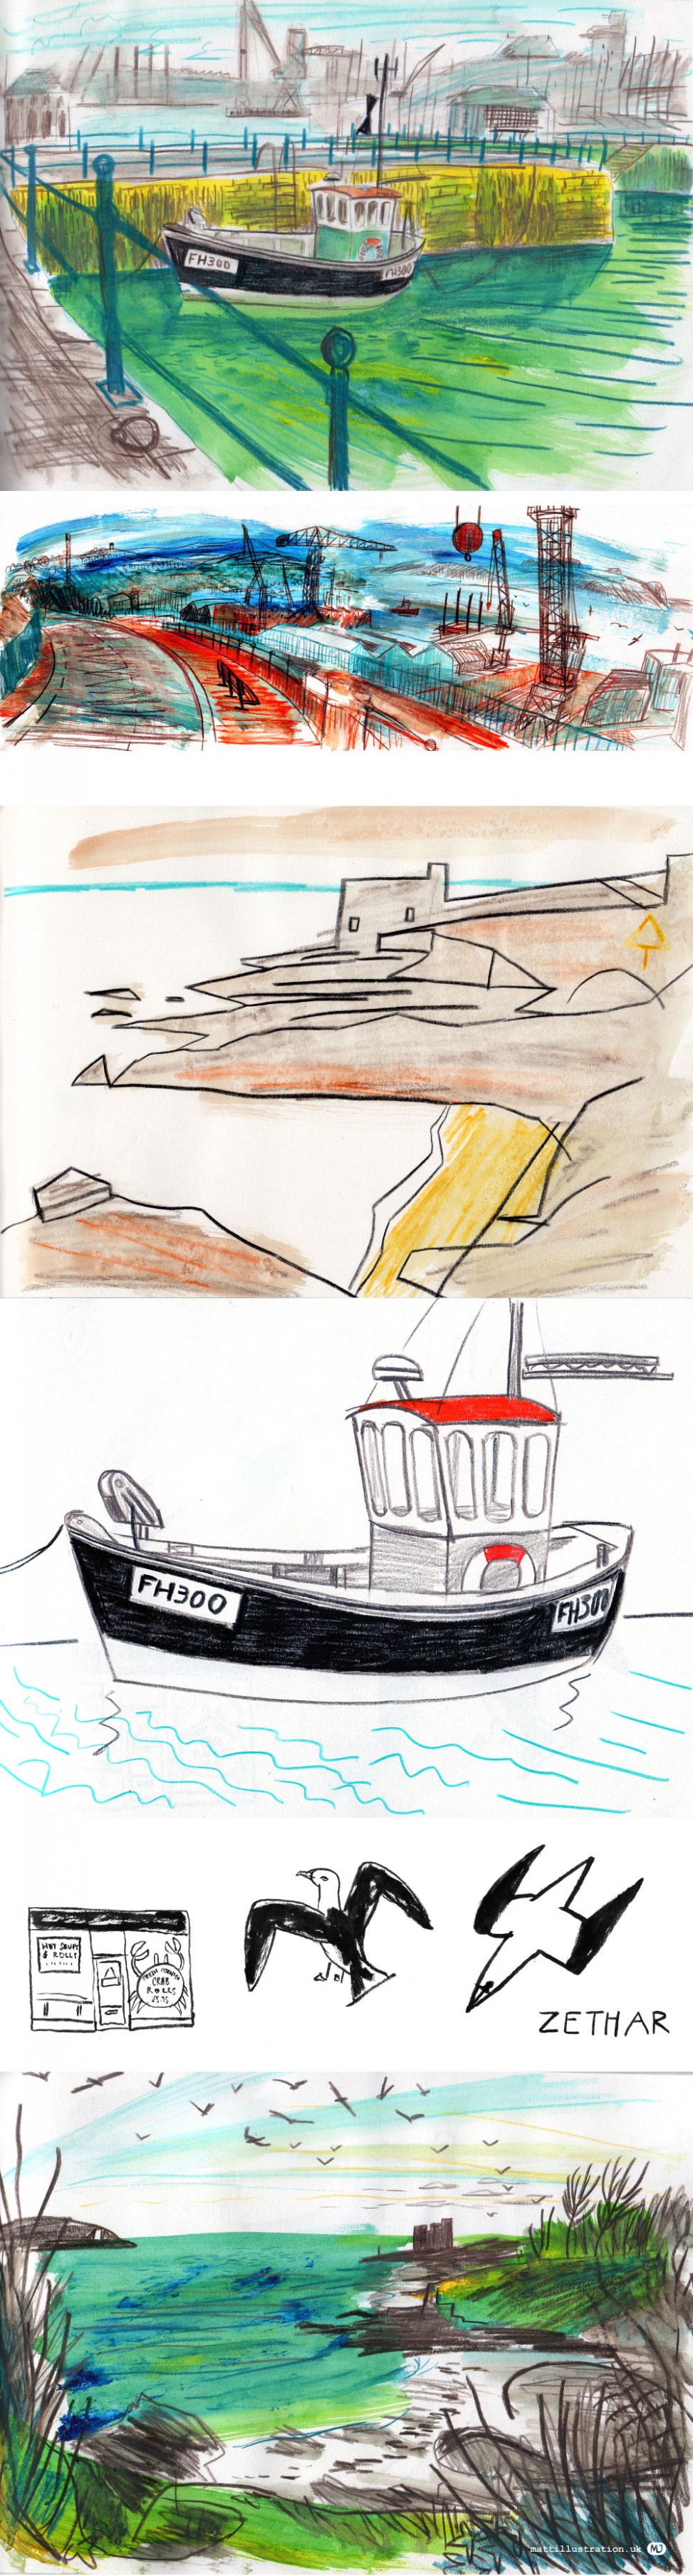 Sketches of Falmouth Harbour, docks and fishing boats